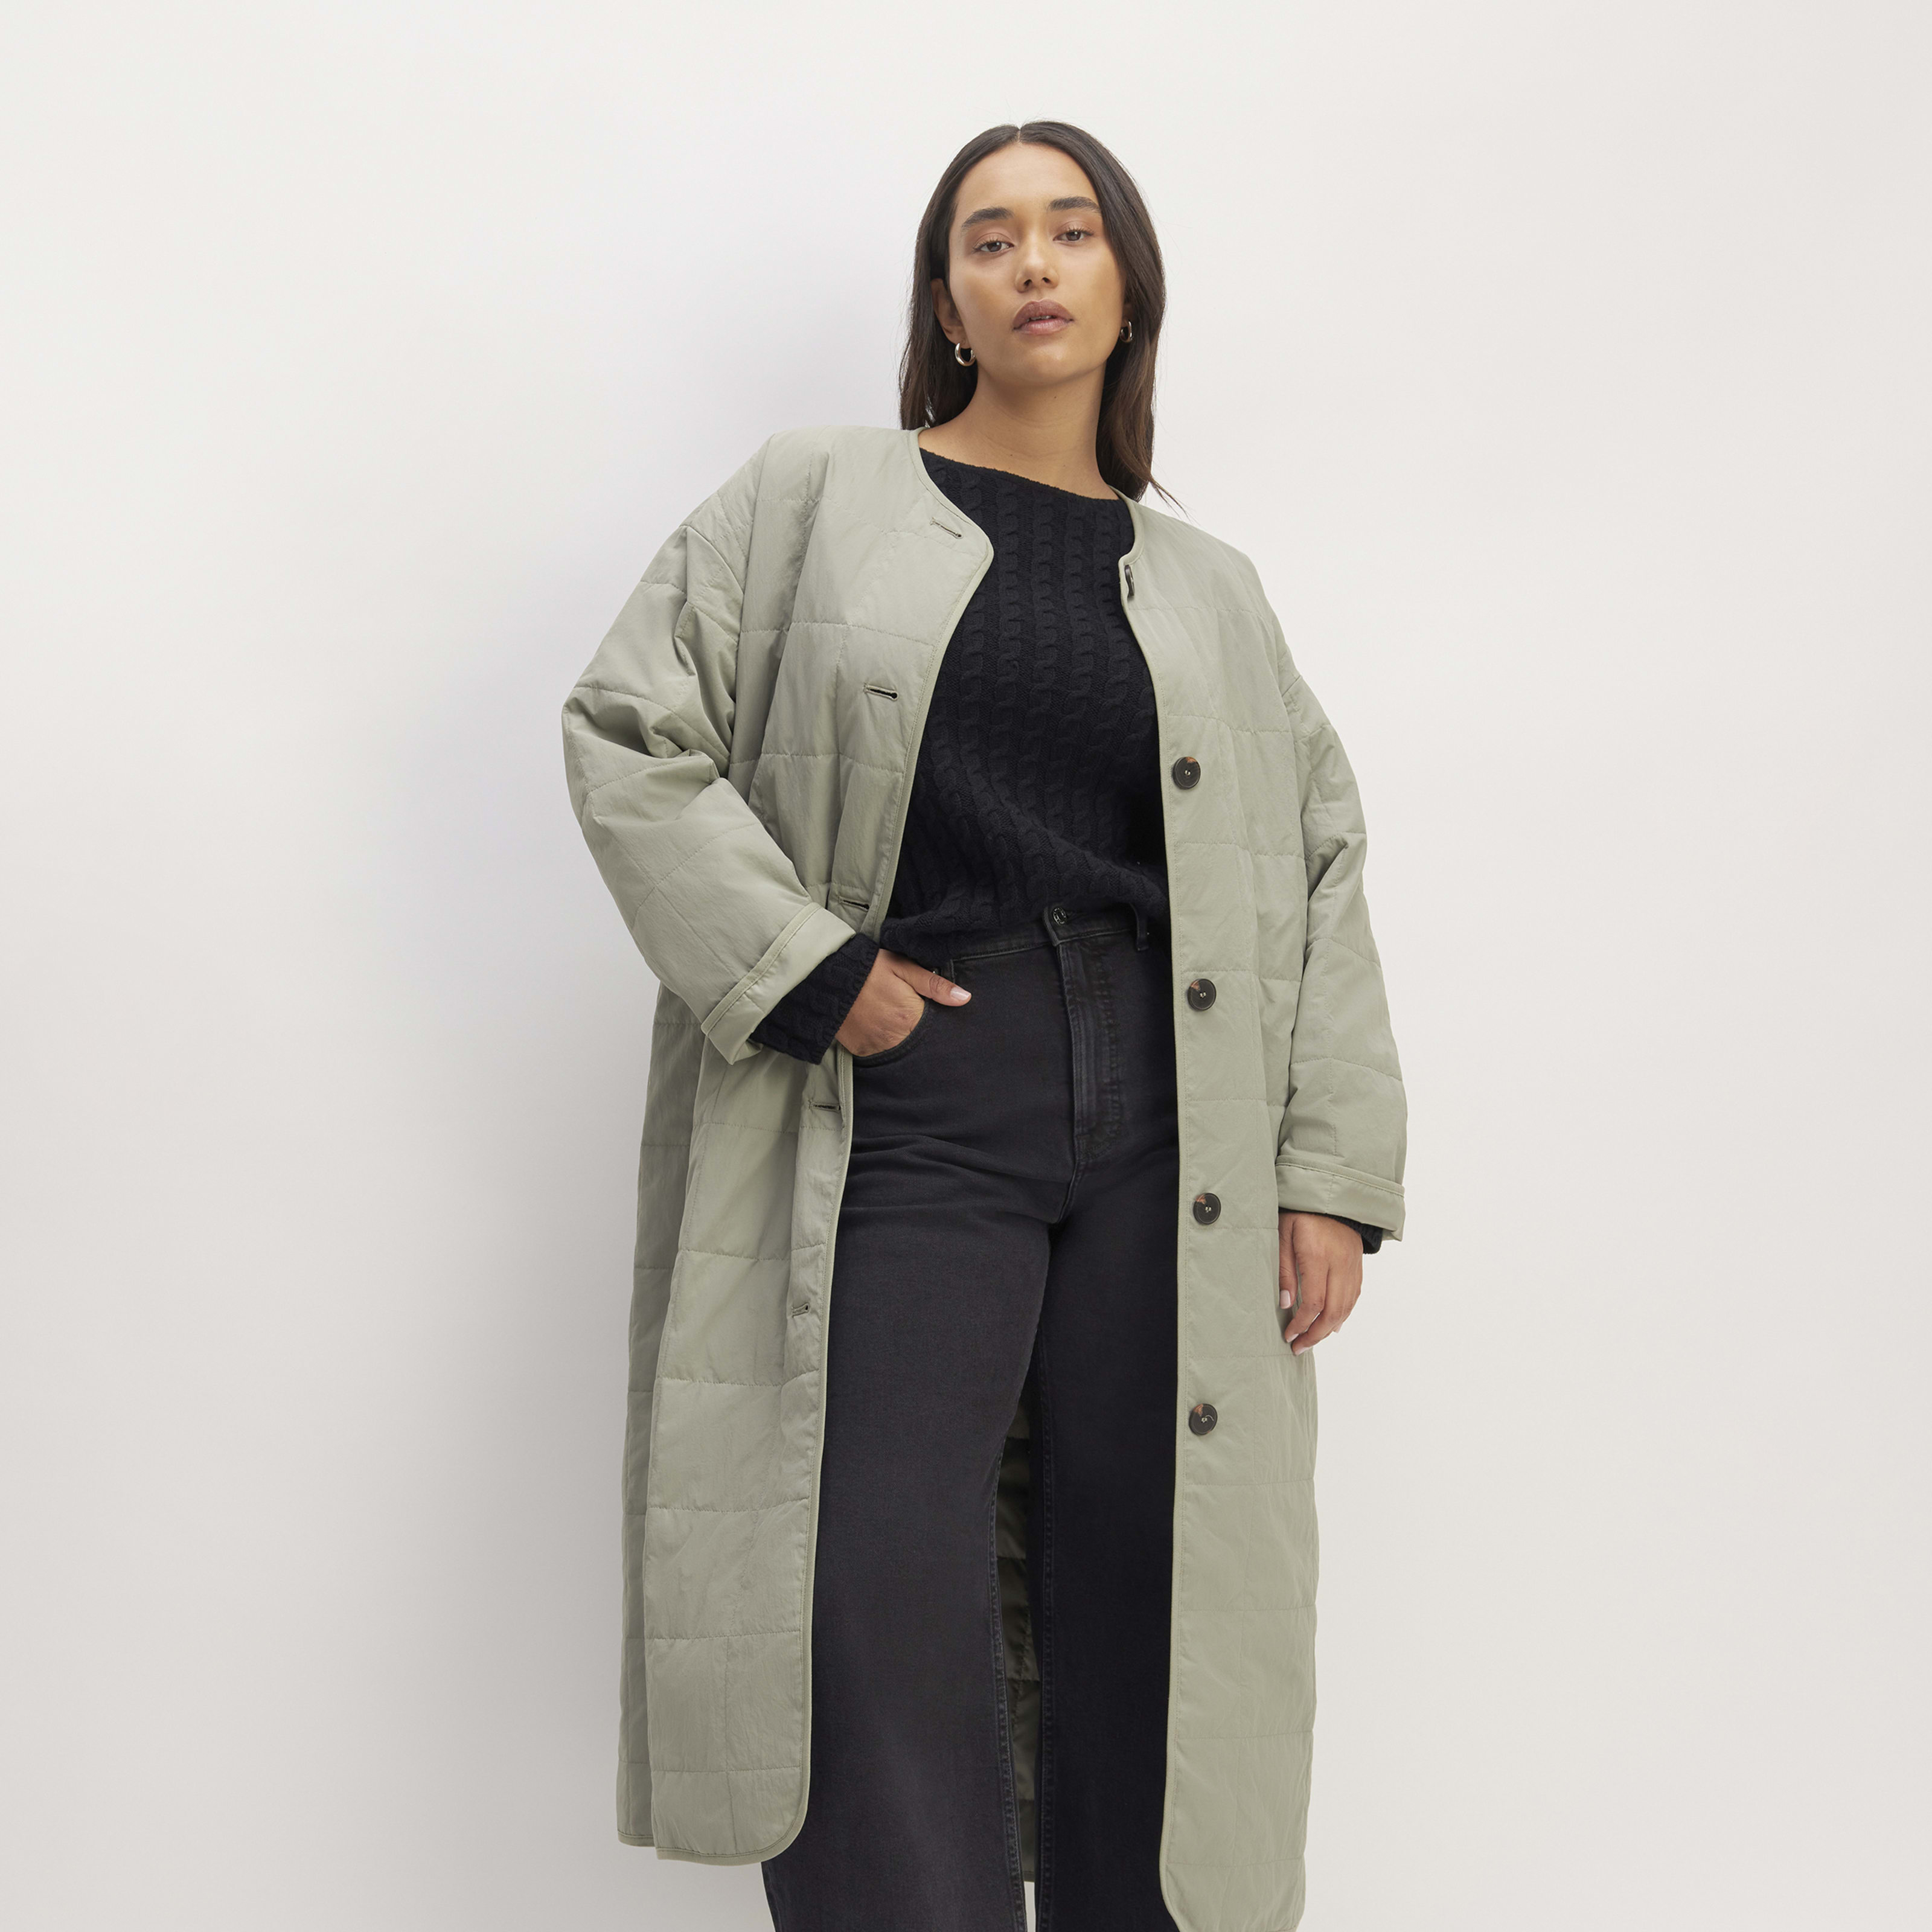 women's renew quilted long liner by everlane in sage green, size xxs